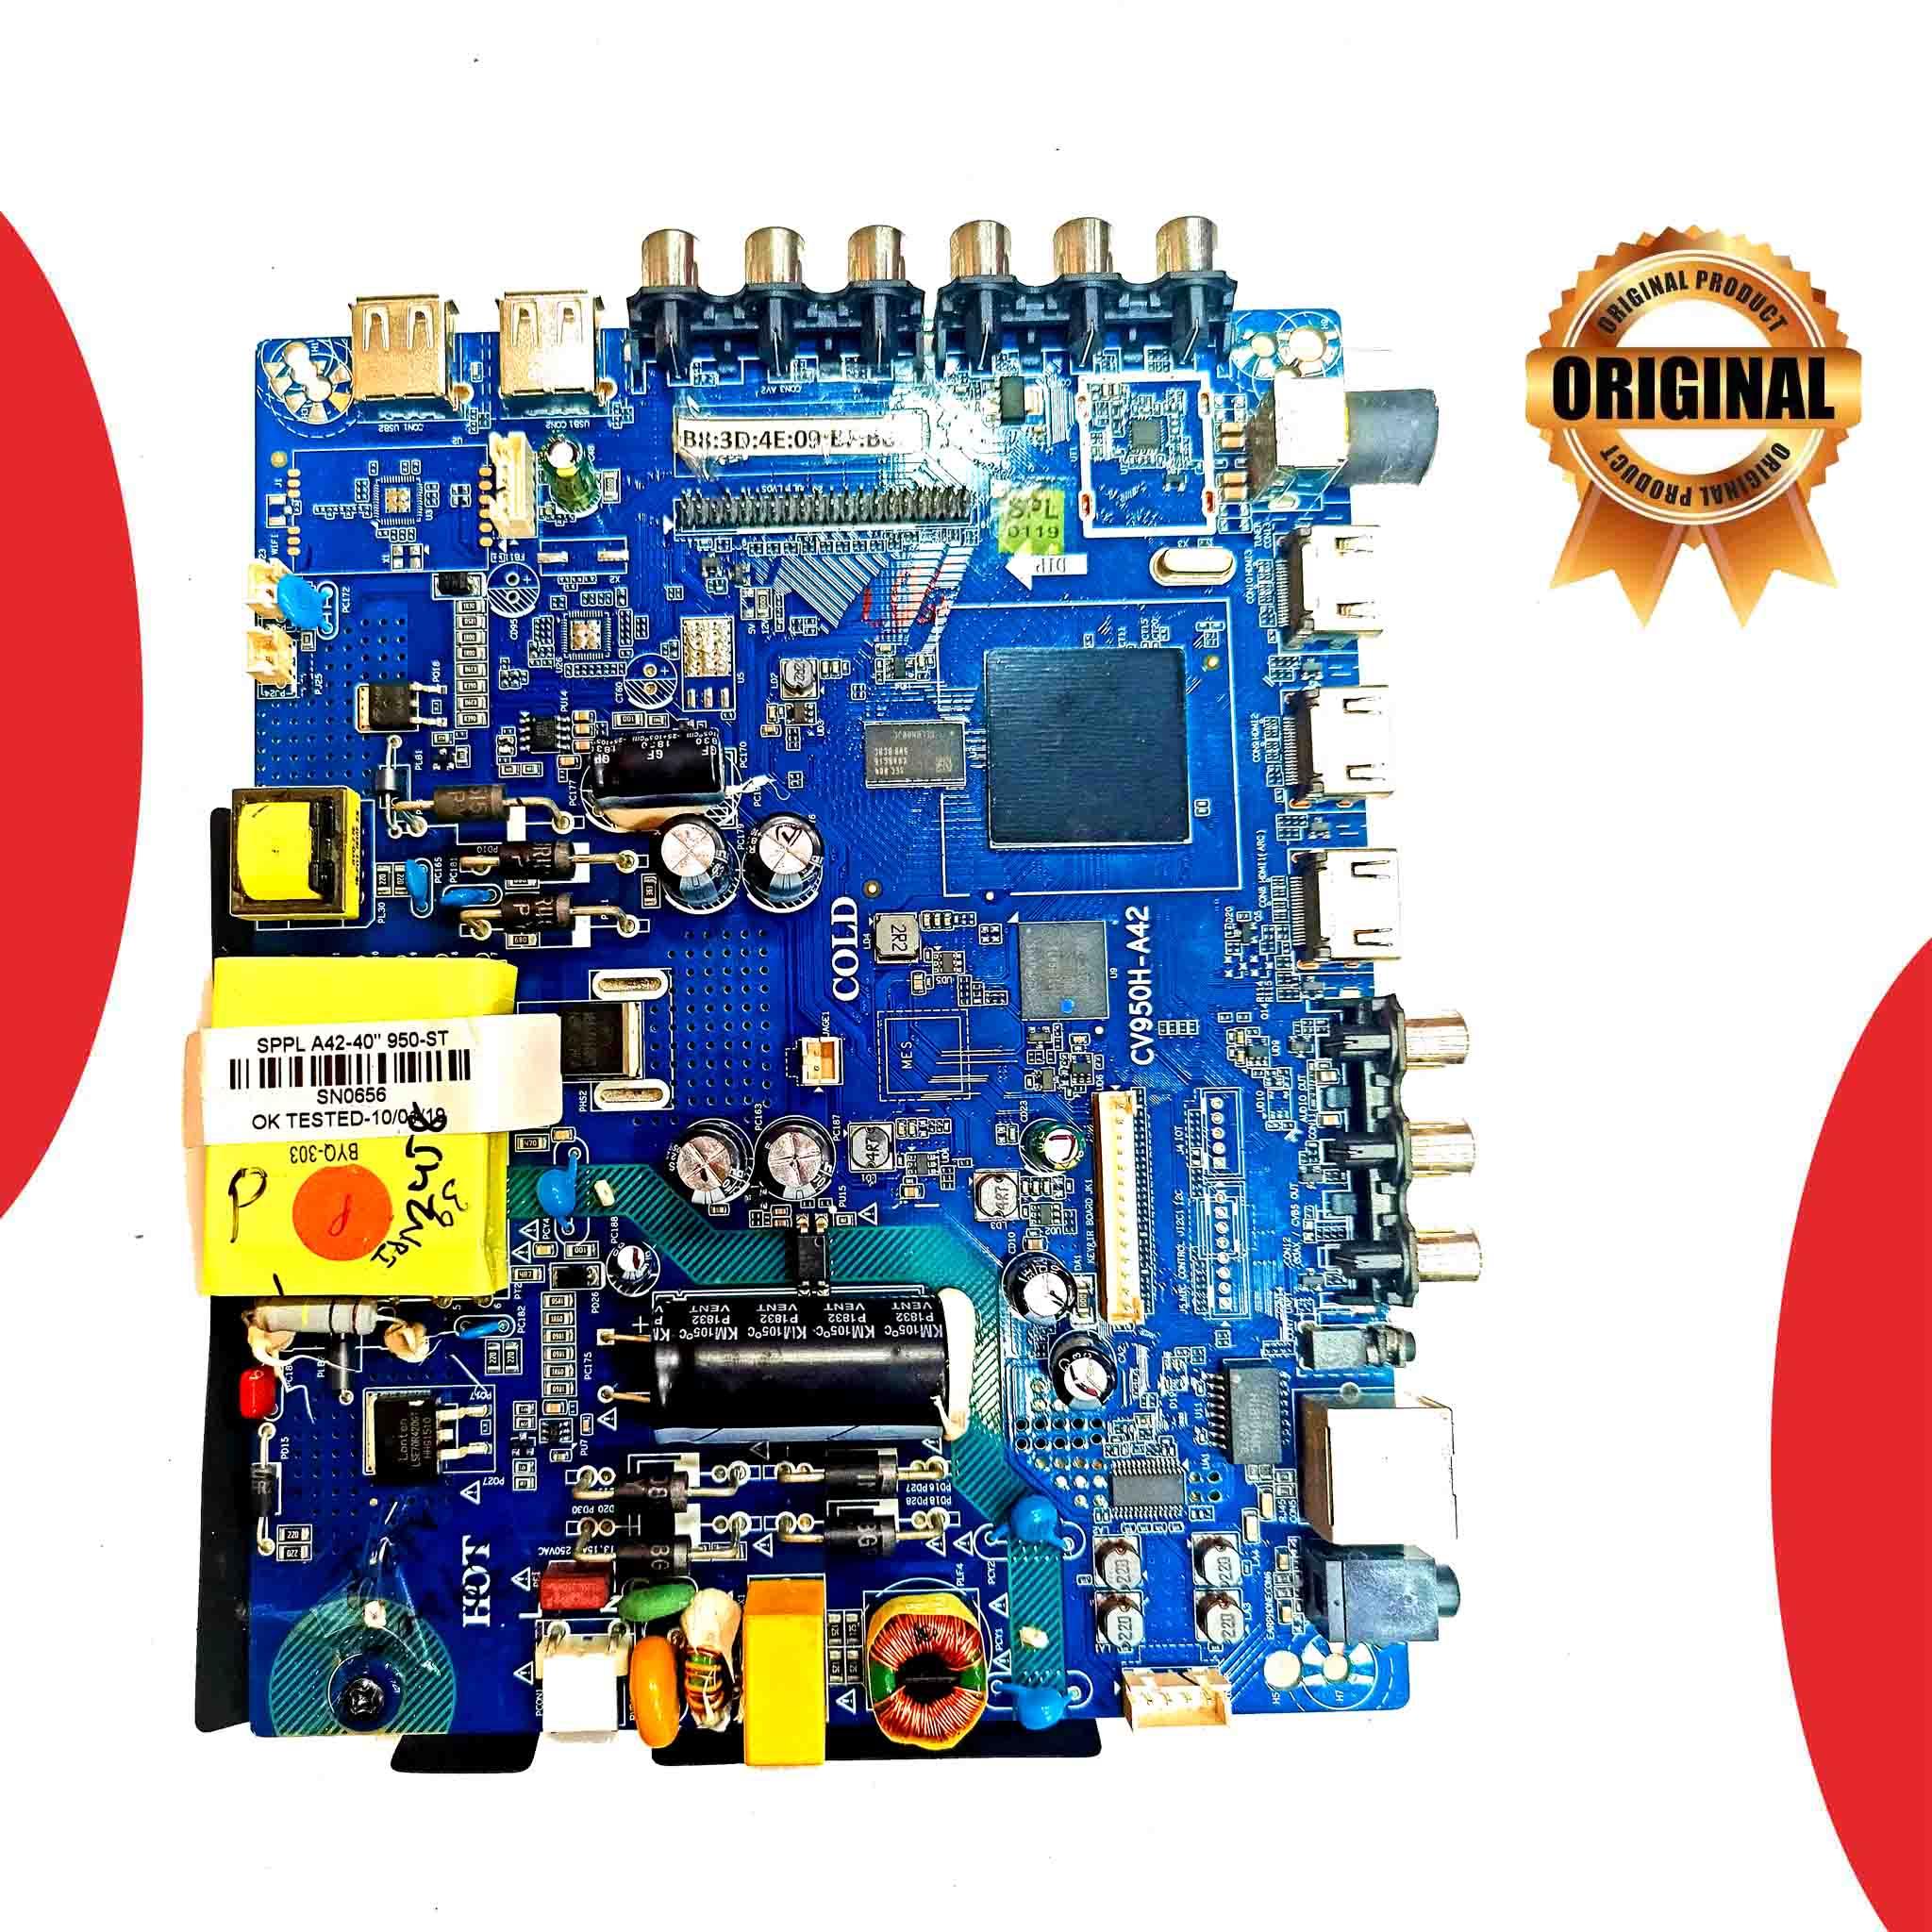 Model 32T8361HD2019 Micromax LED TV Motherboard - Great Bharat Electronics